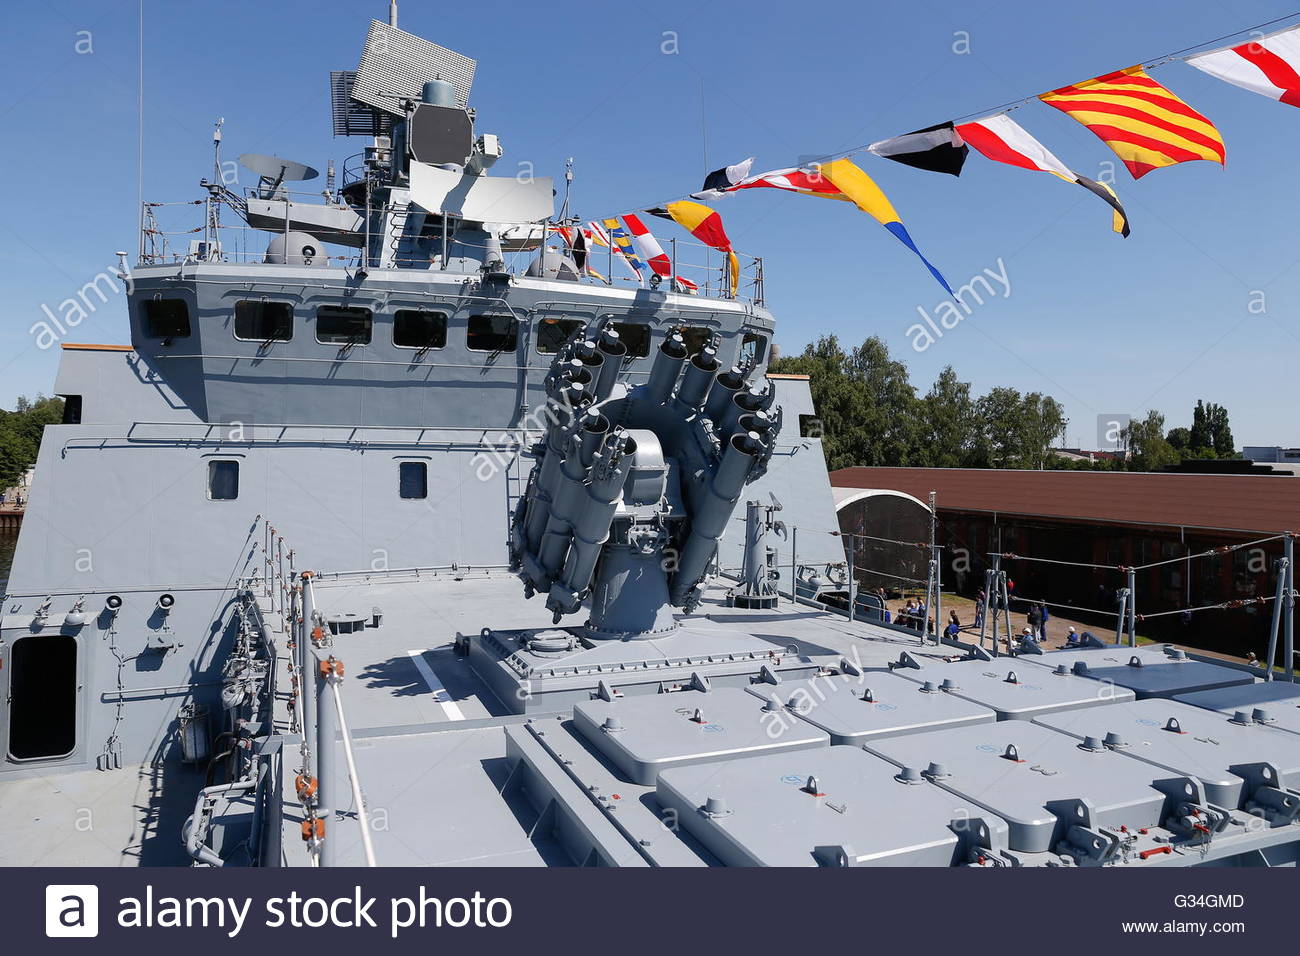 kaliningrad-russia-june-7-2016-the-commissioning-of-the-admiral-essen-G34GMD.jpg